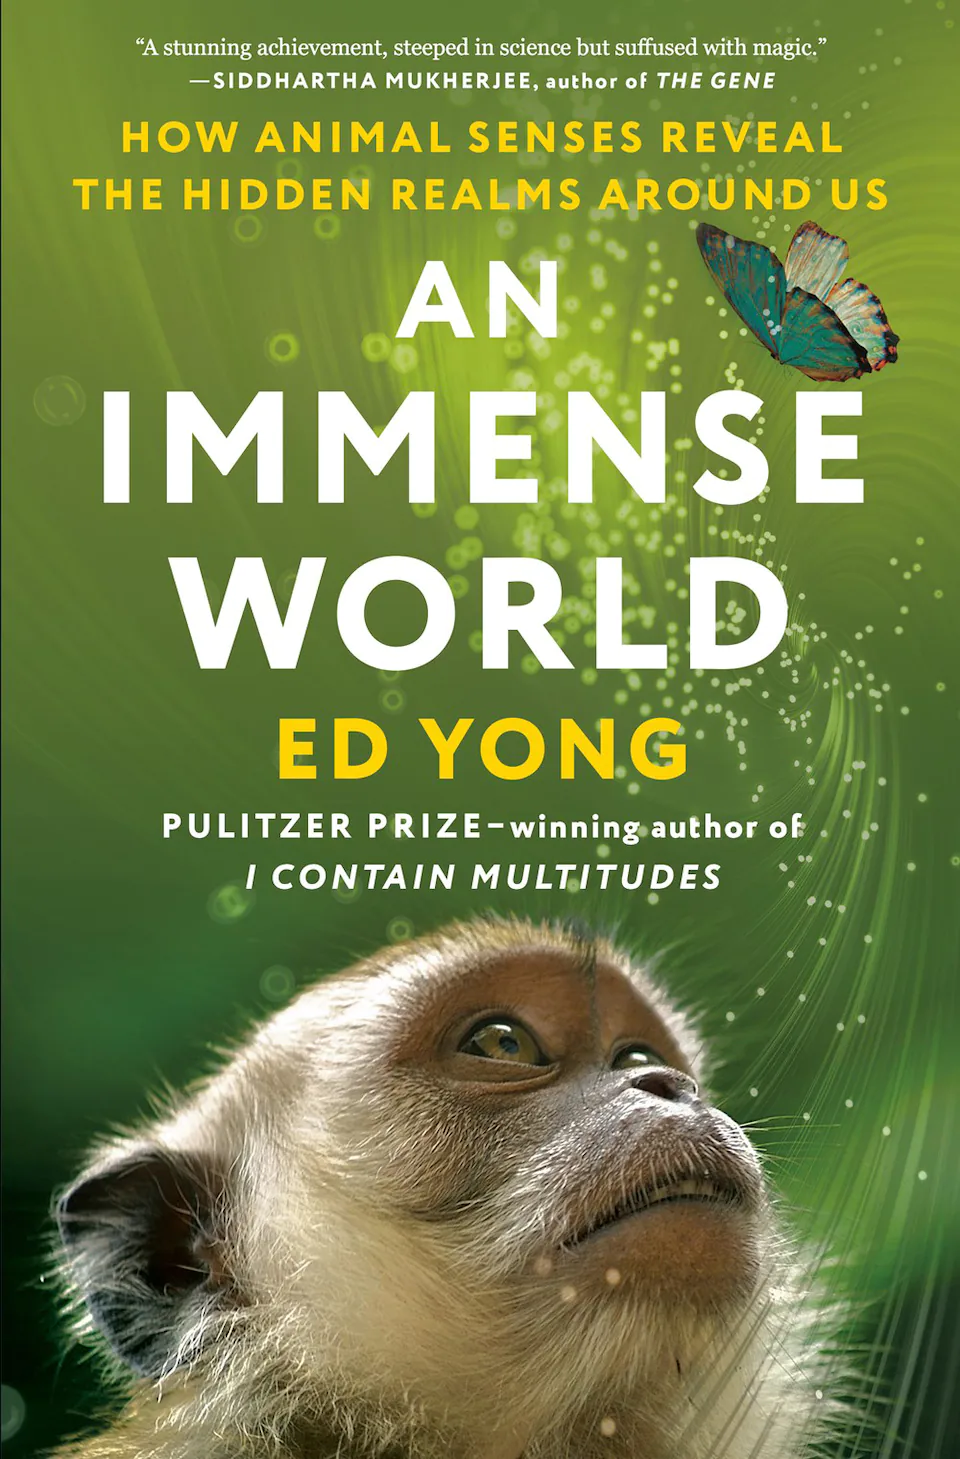 An Immense World by Ed Yong finished on 2023 Oct 22